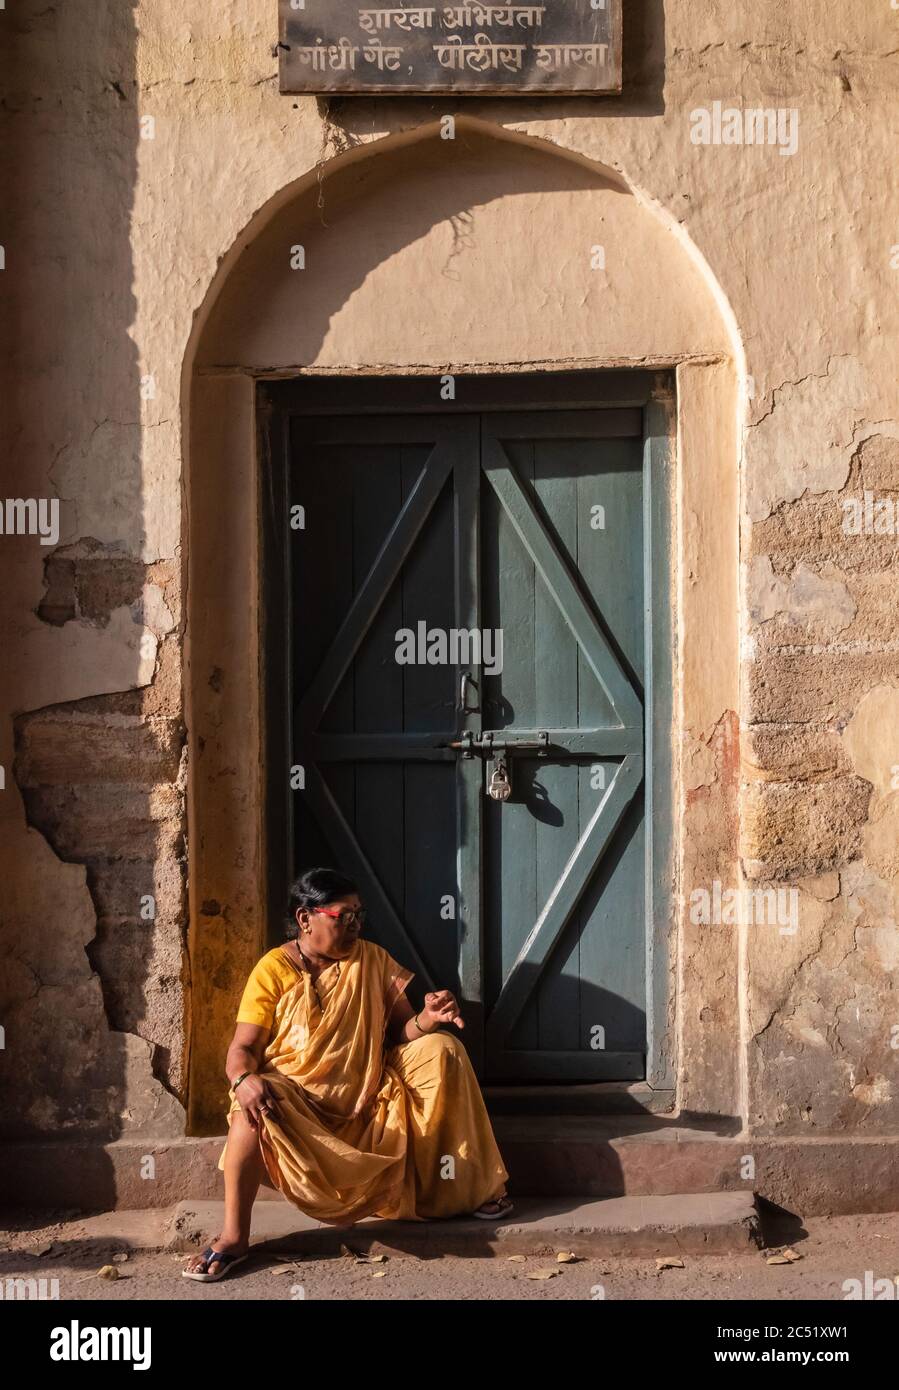 Nagpur, Maharahstra, India - March 2019: An Indian woman sitting alone under an old door on the streets of the city. Stock Photo